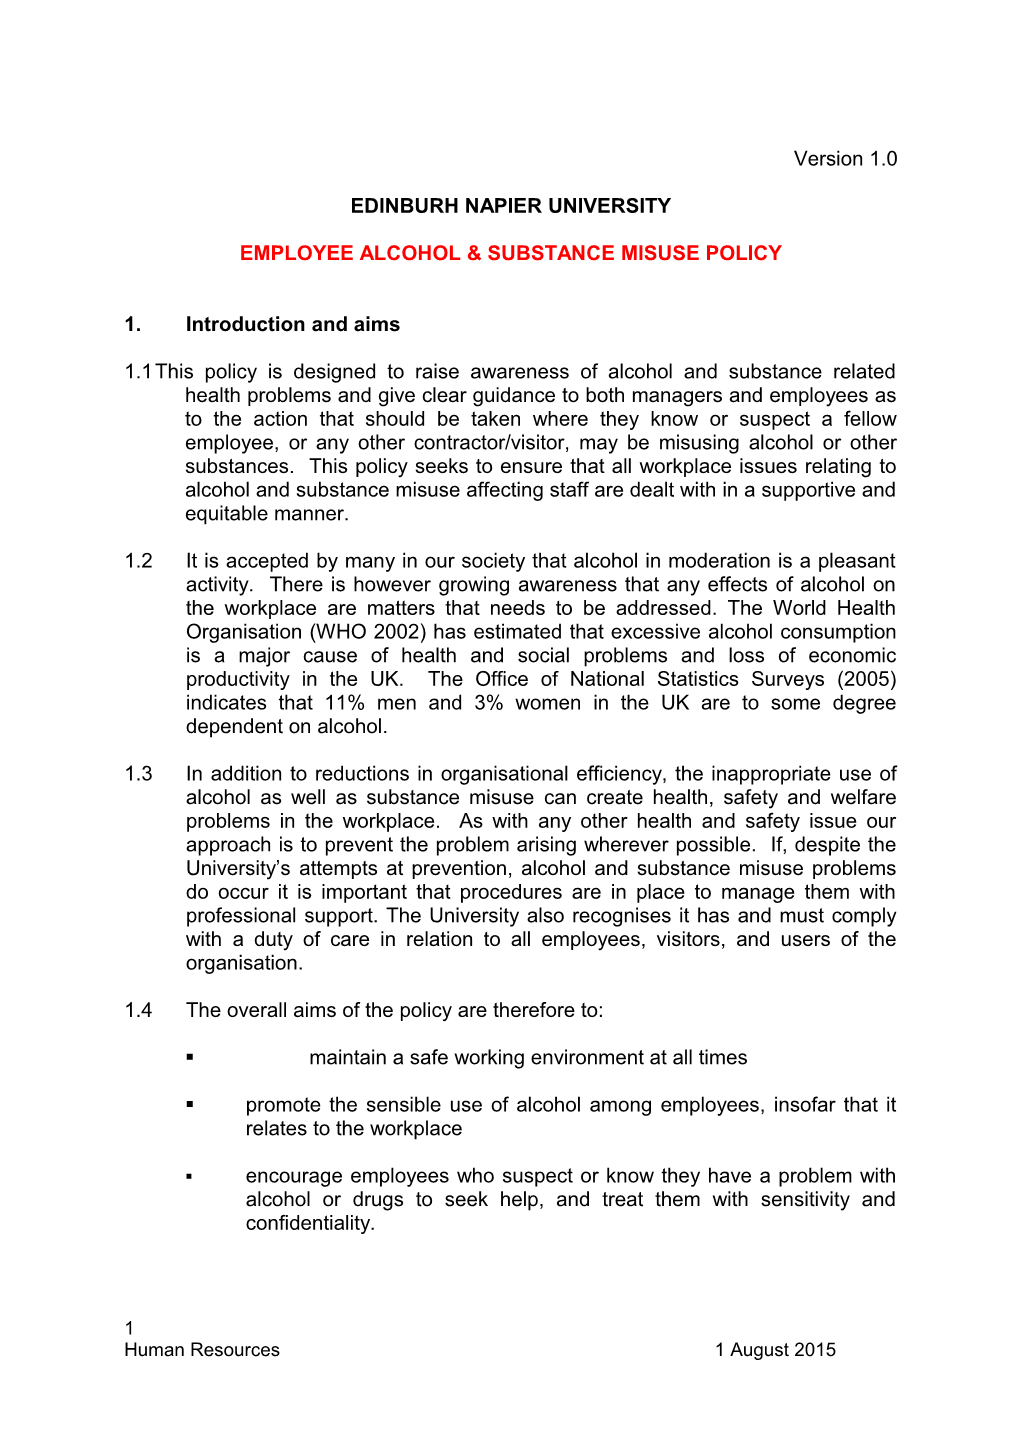 Employee Alcohol & Substance Misuse Policy